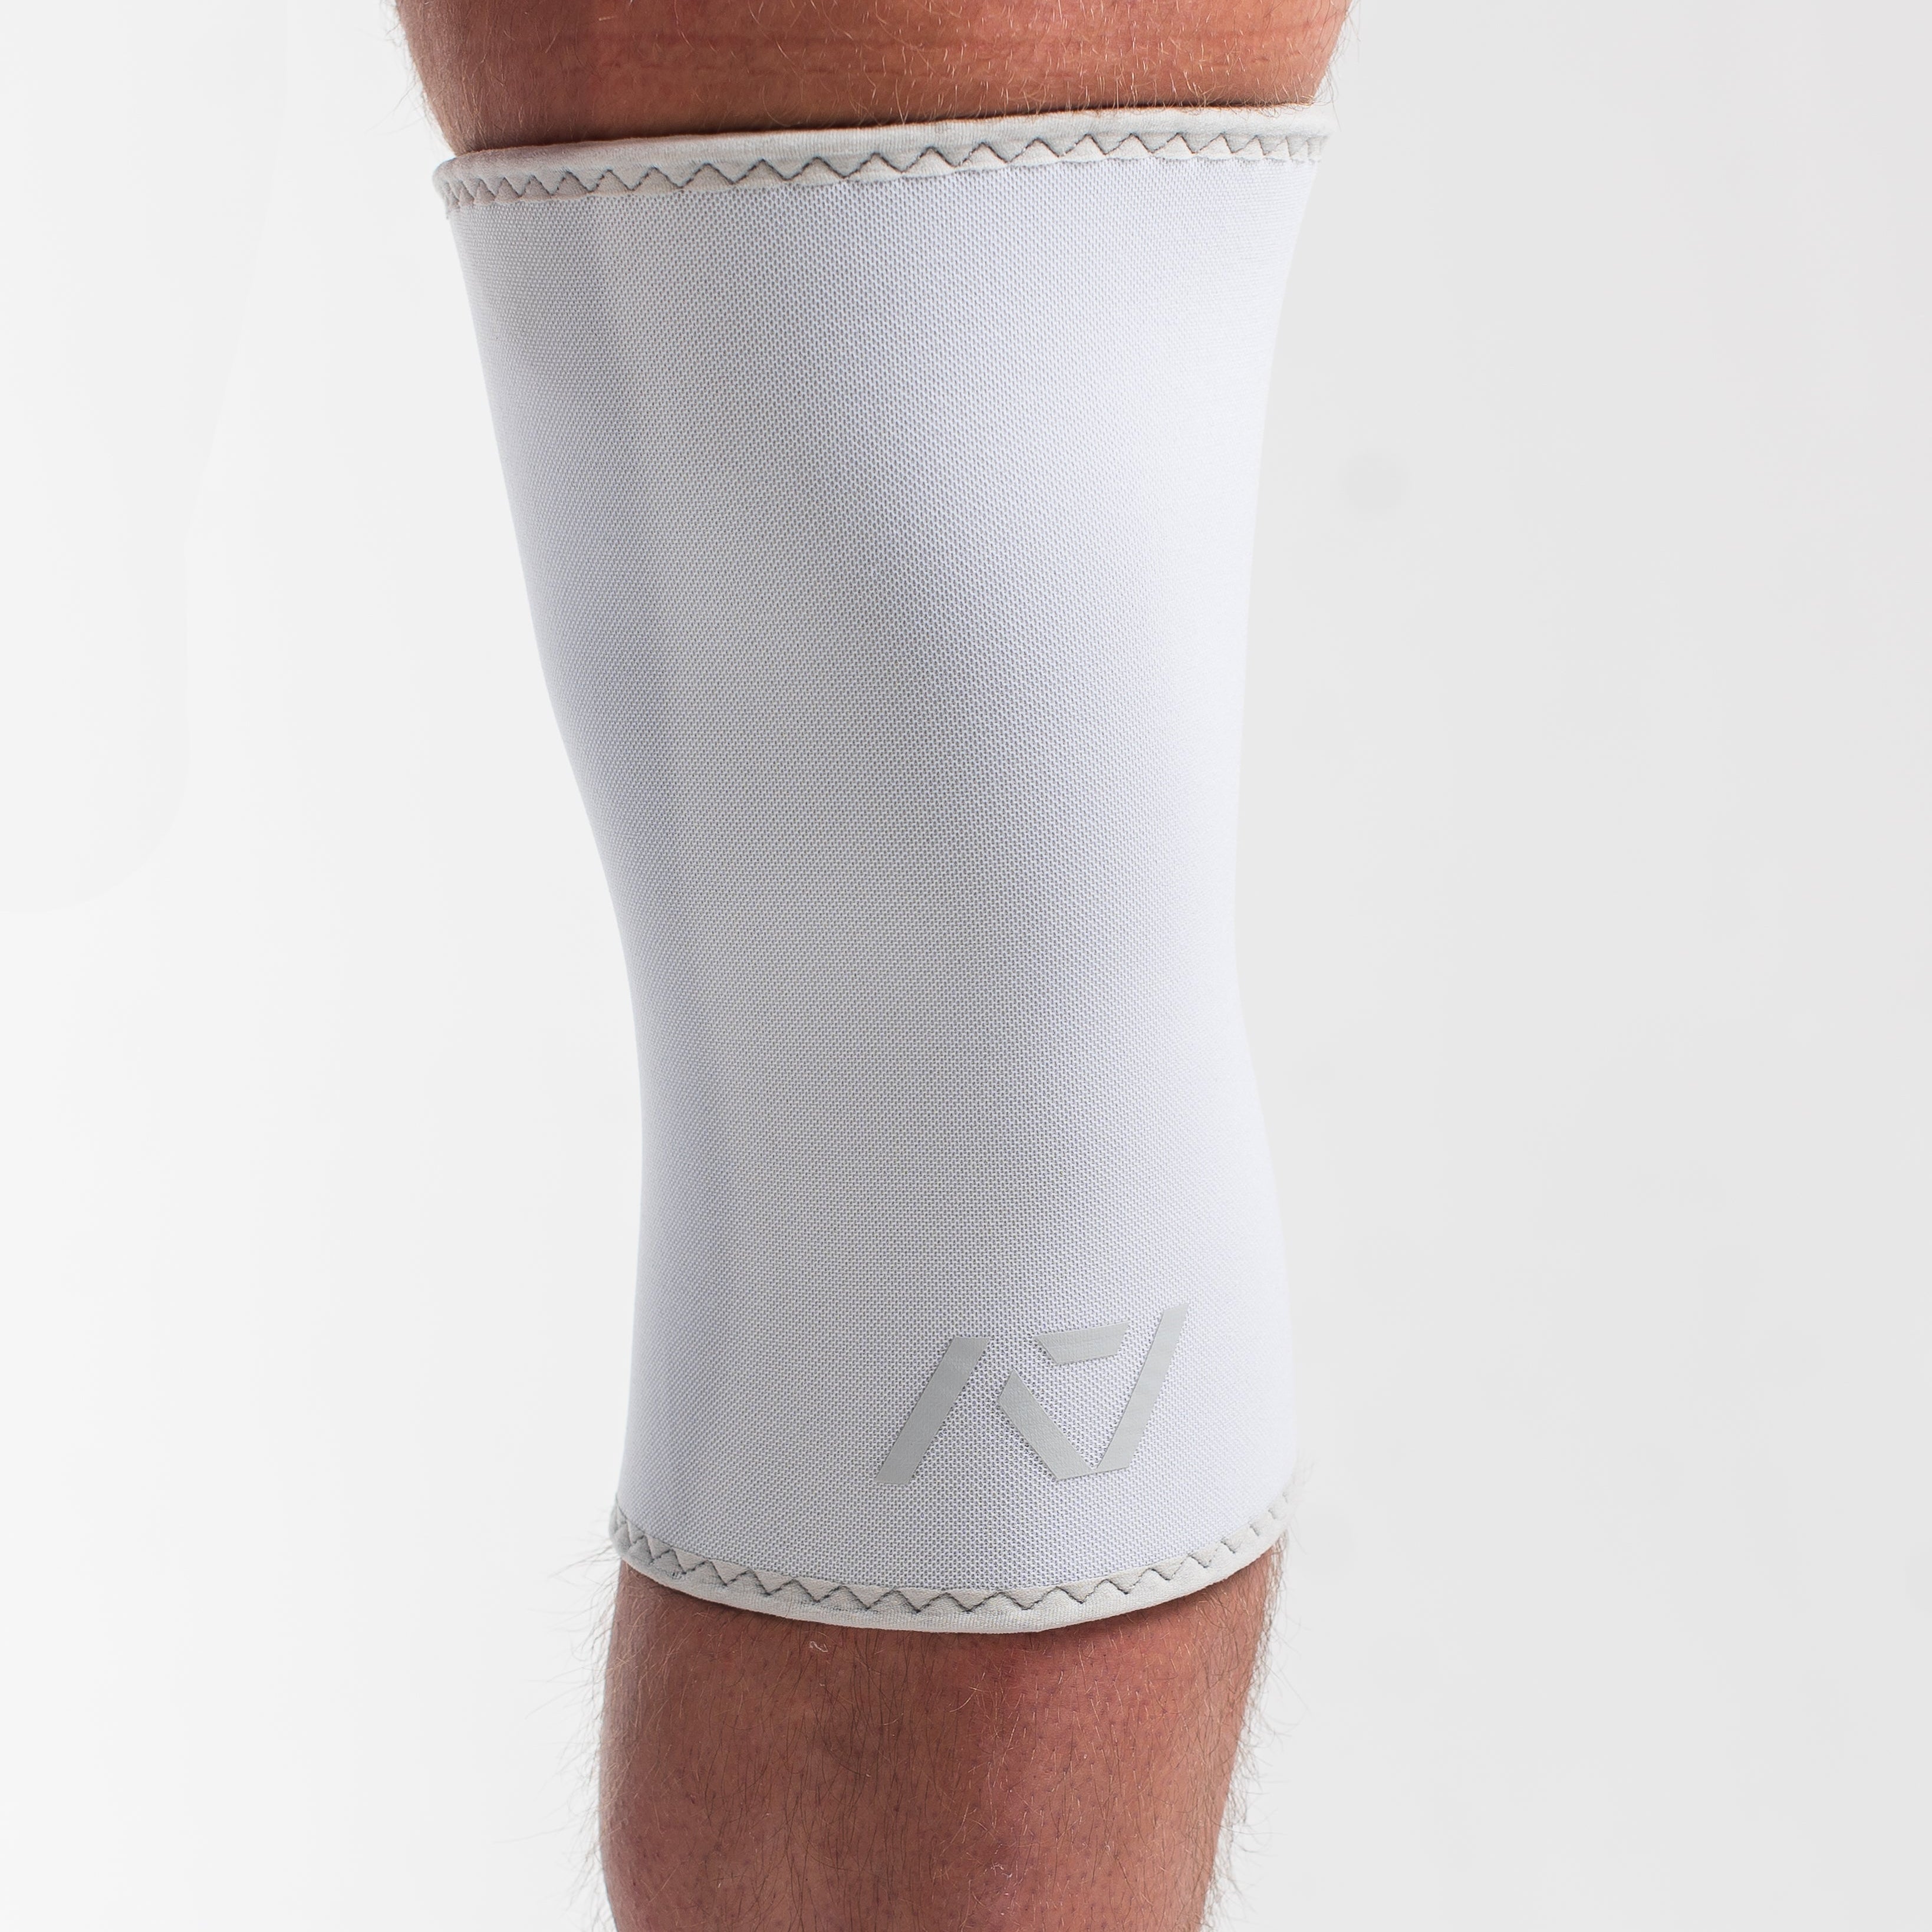 A7 IPF Approved Hourglass Knee Sleeves feature an hourglass-shaped taper fit to provide knee compression while maintaining proper tightness around the calf and quad, offered in three stiffnesses (Flexi, Stiff and Rigor Mortis). The IPF Approved Kit includes Powerlifting Singlet, A7 Meet Shirt, A7 Zebra Wrist Wraps, A7 Deadlift Socks, Hourglass Knee, IPF Approved PAL Lever. Genouillères powerlifting shipping to France, Spain, Ireland, Germany, Italy, Sweden and EU.